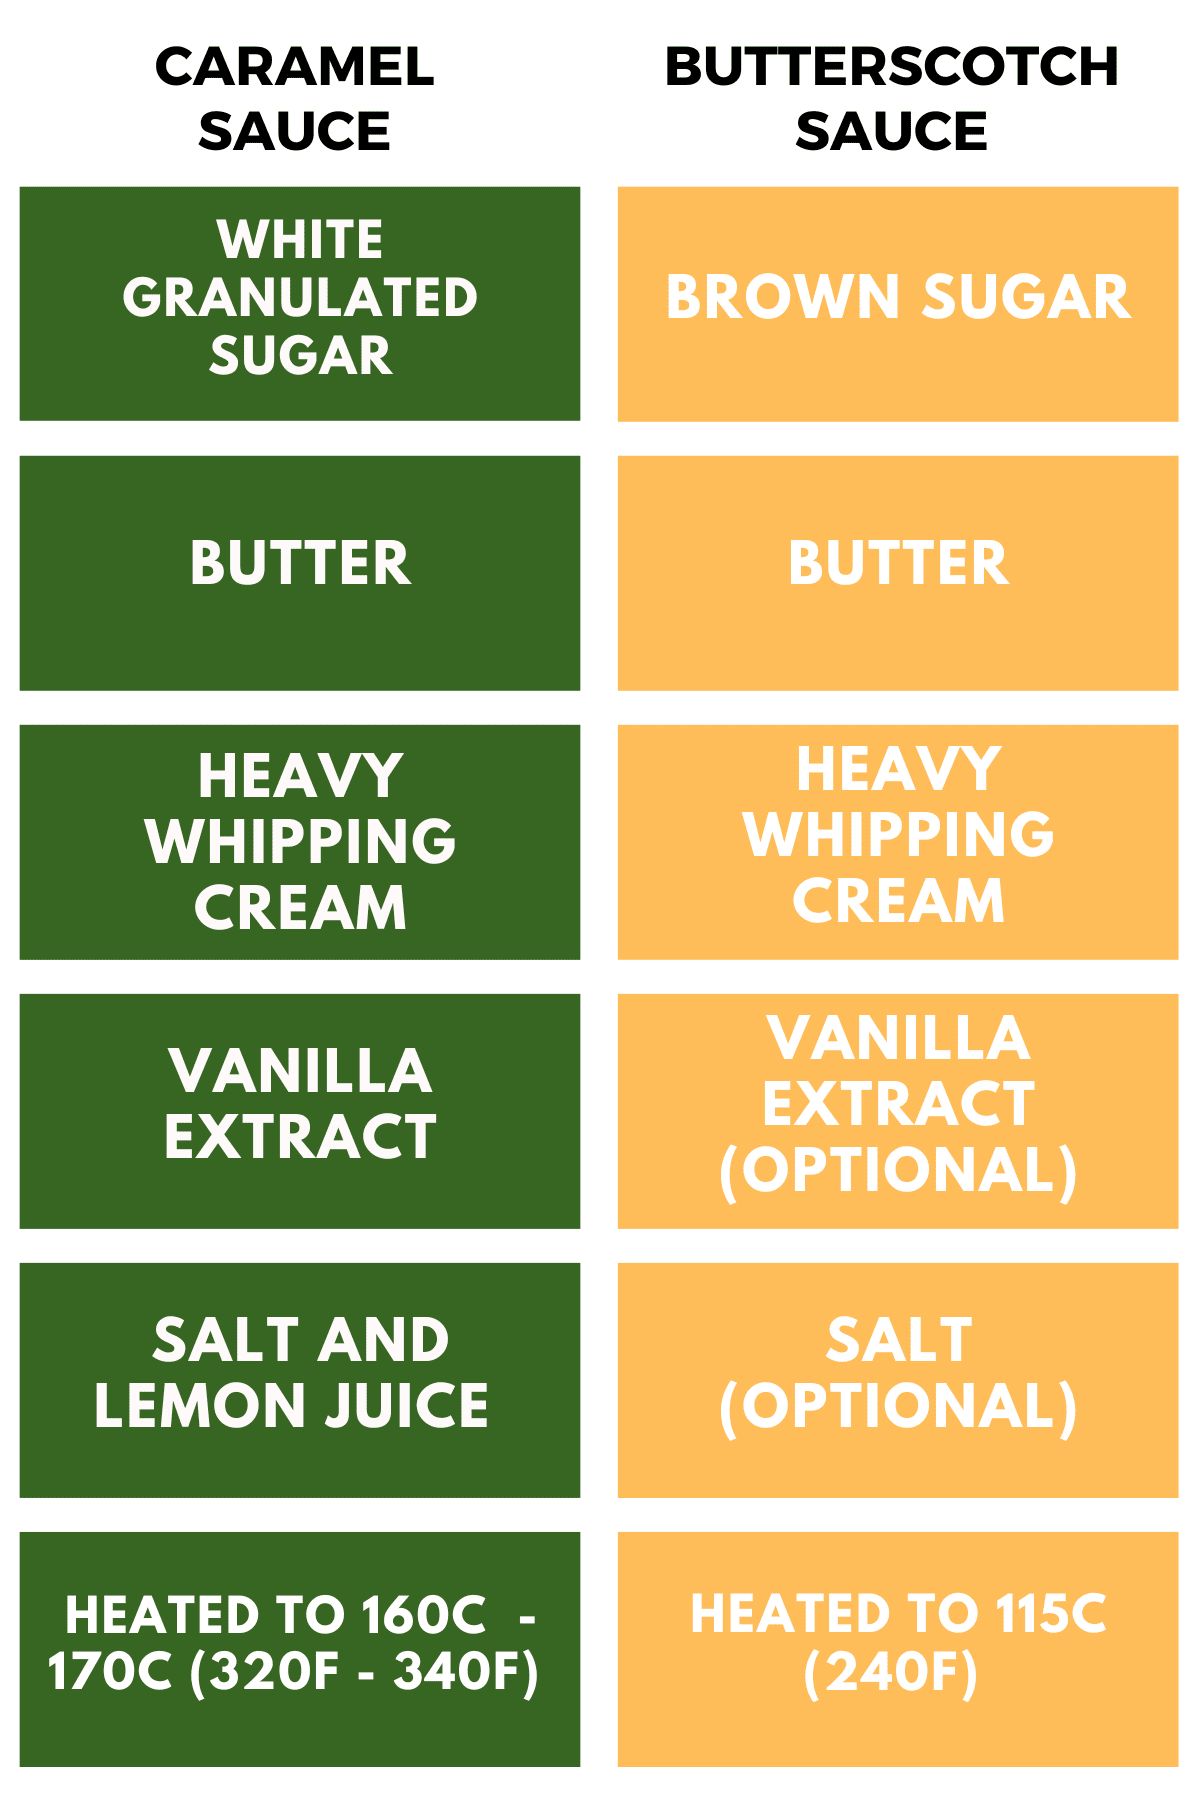 A table listing the differences between butterscotch sauce and salted caramel sauce.